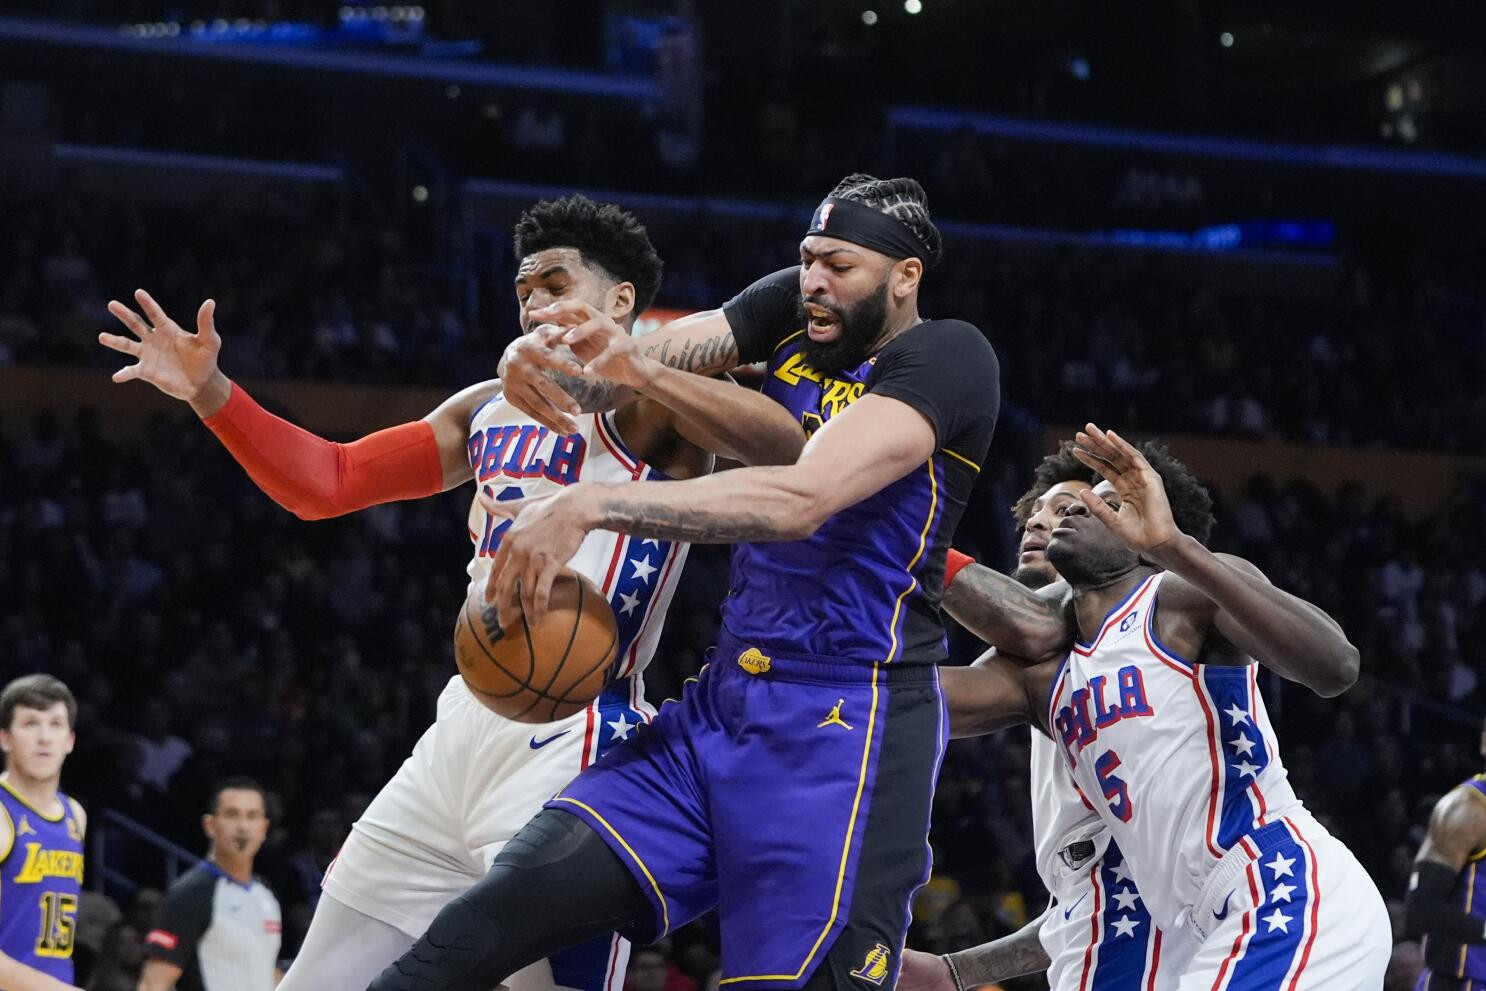 Lakers Overcome Turnover Woes to Defeat 76ers, Tie Team Record for Three-Pointers